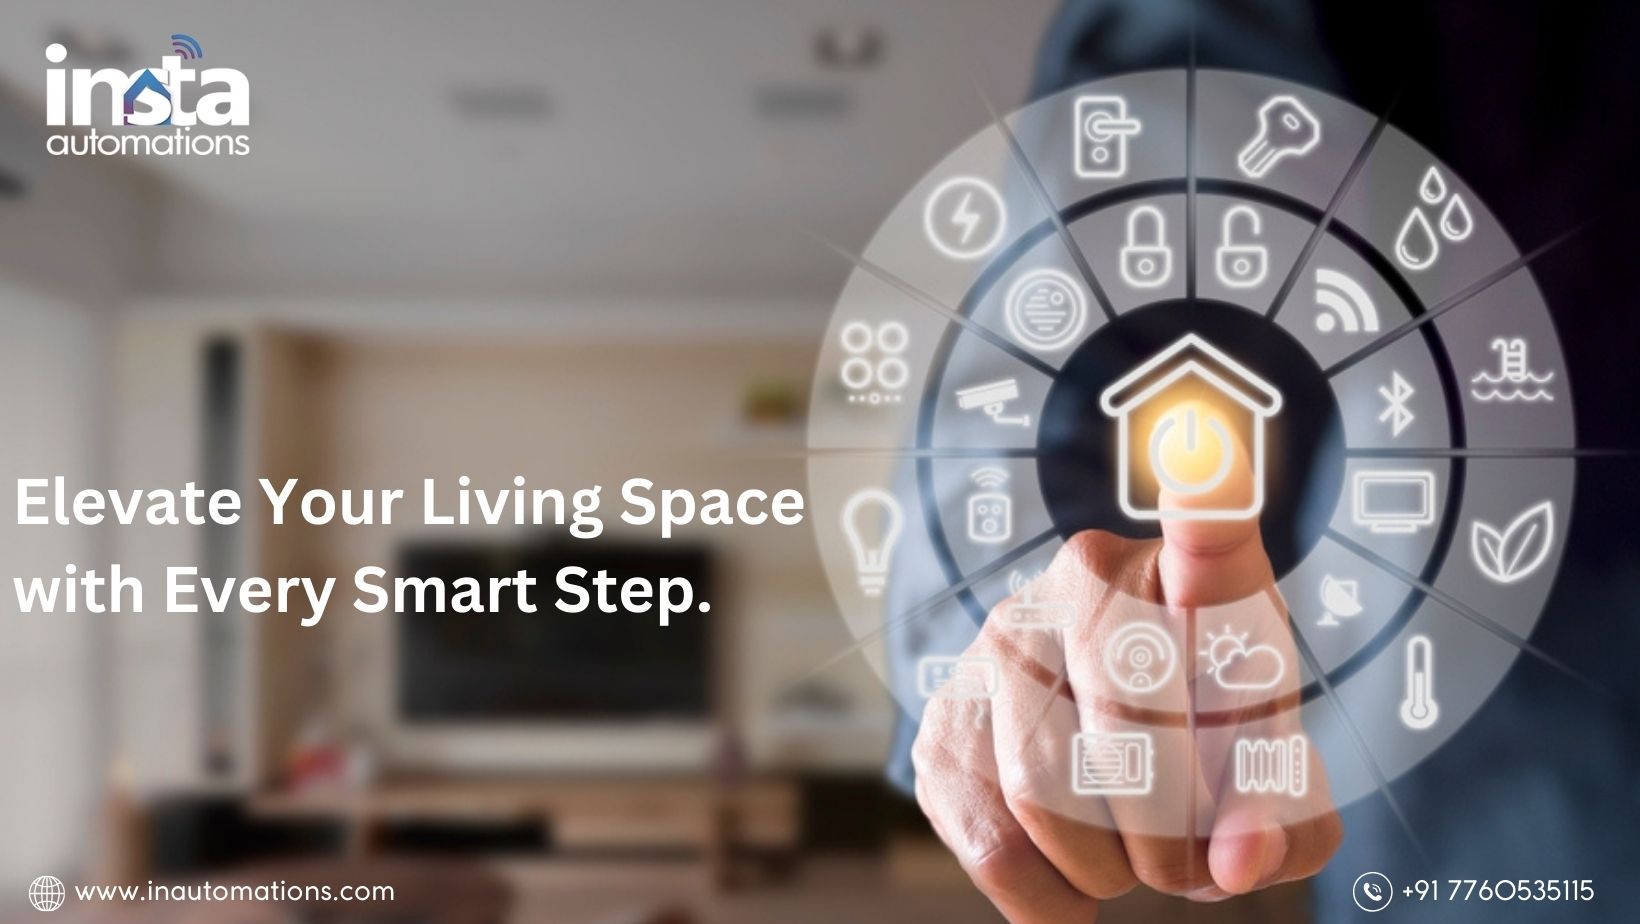 Revolutionize Your Living Space, Smart Home with our Mobile App